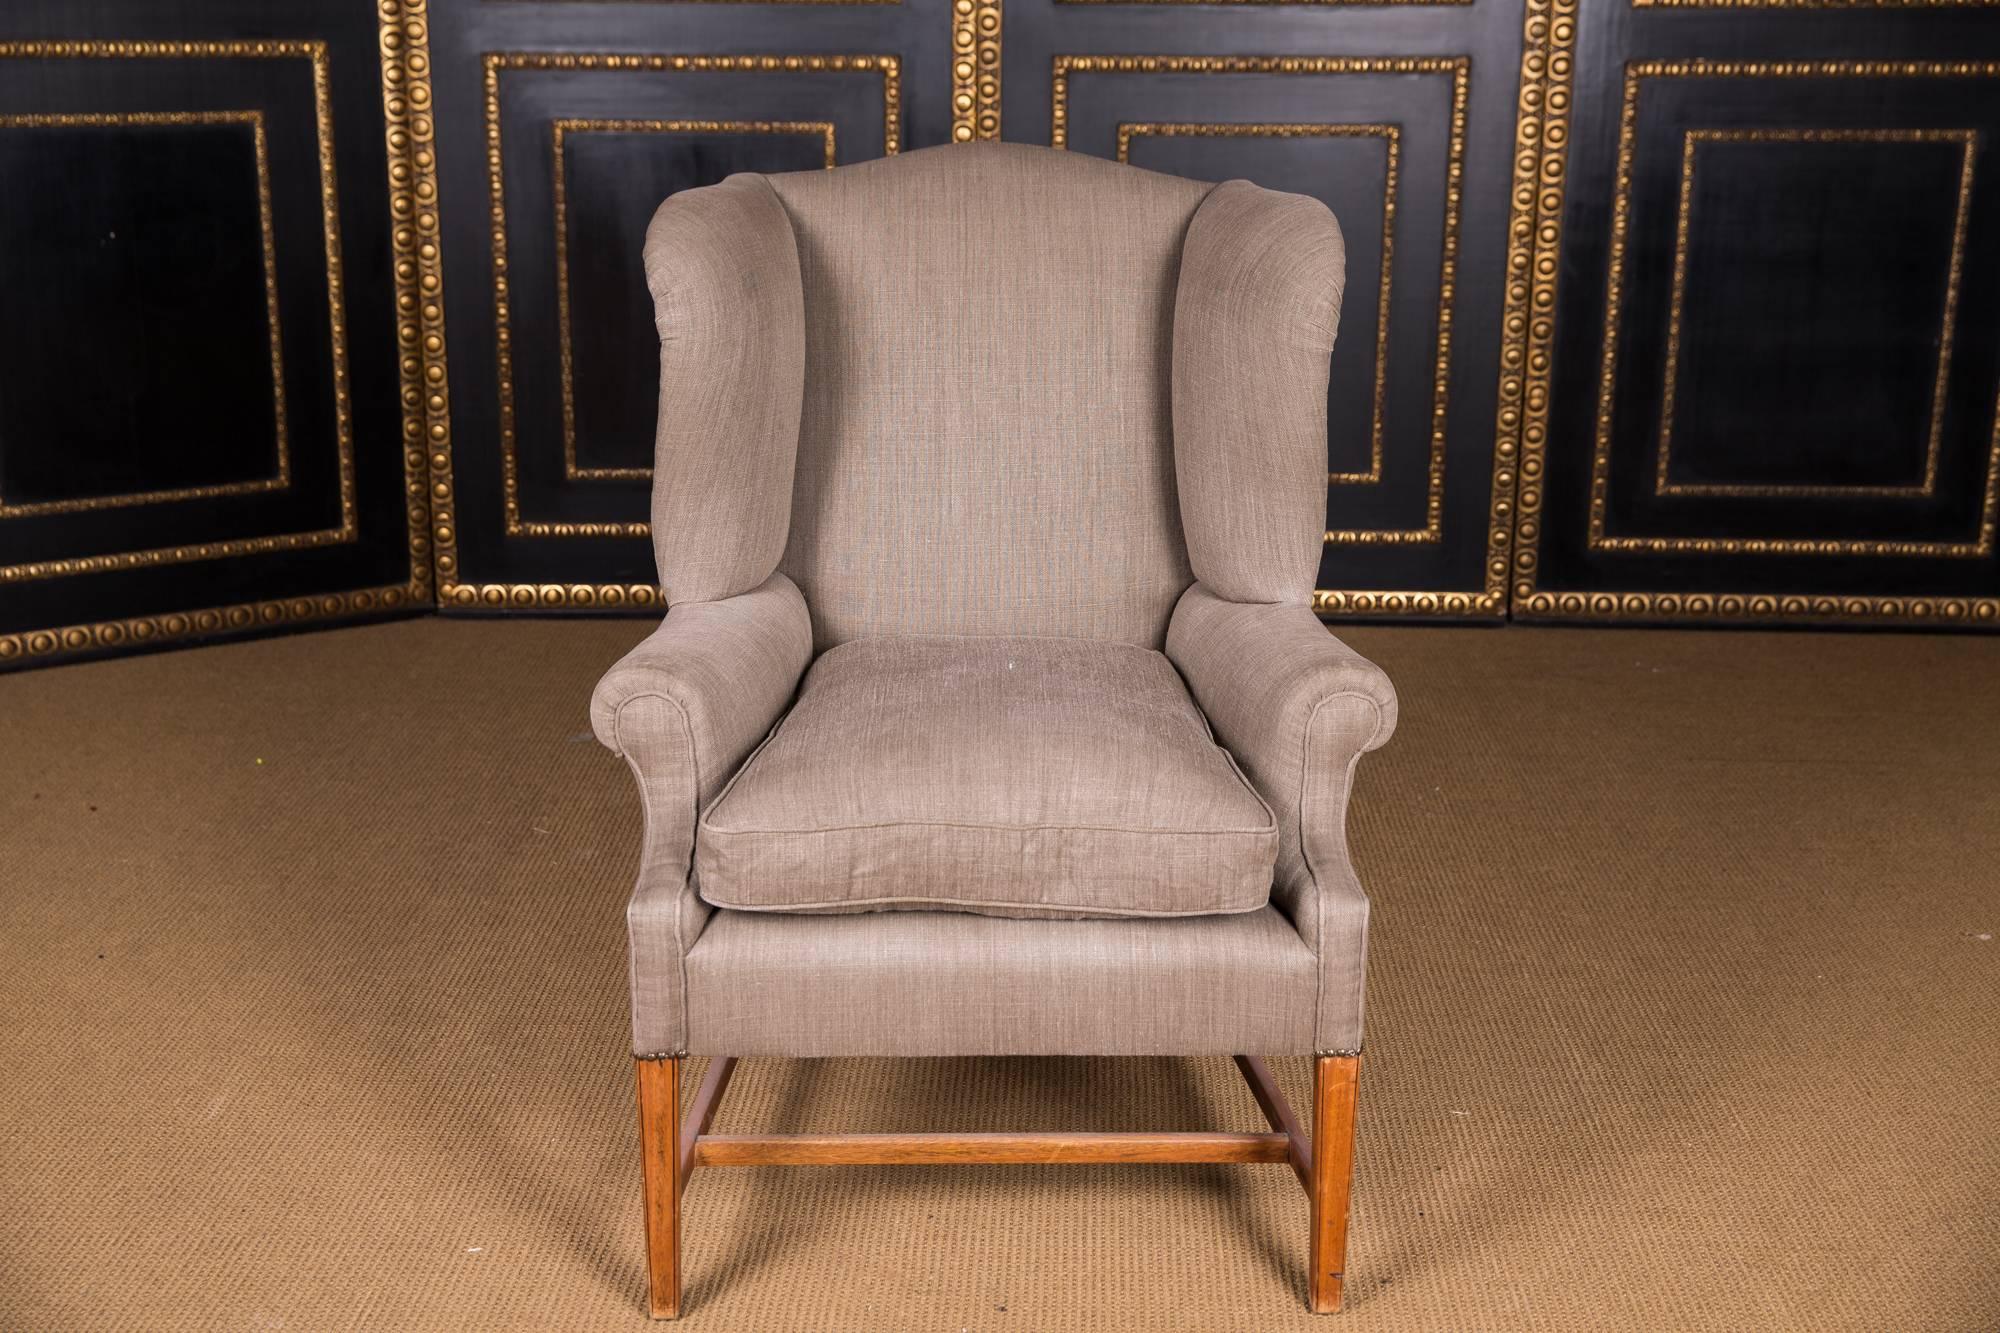 Straight frame on straight legs. Short supports for cambered armrests. High-backed backrest frame. Laterally slightly curved armrests. High quality original Classic upholstery with fine linen fabric.

The fabric cover is as new. A timeless